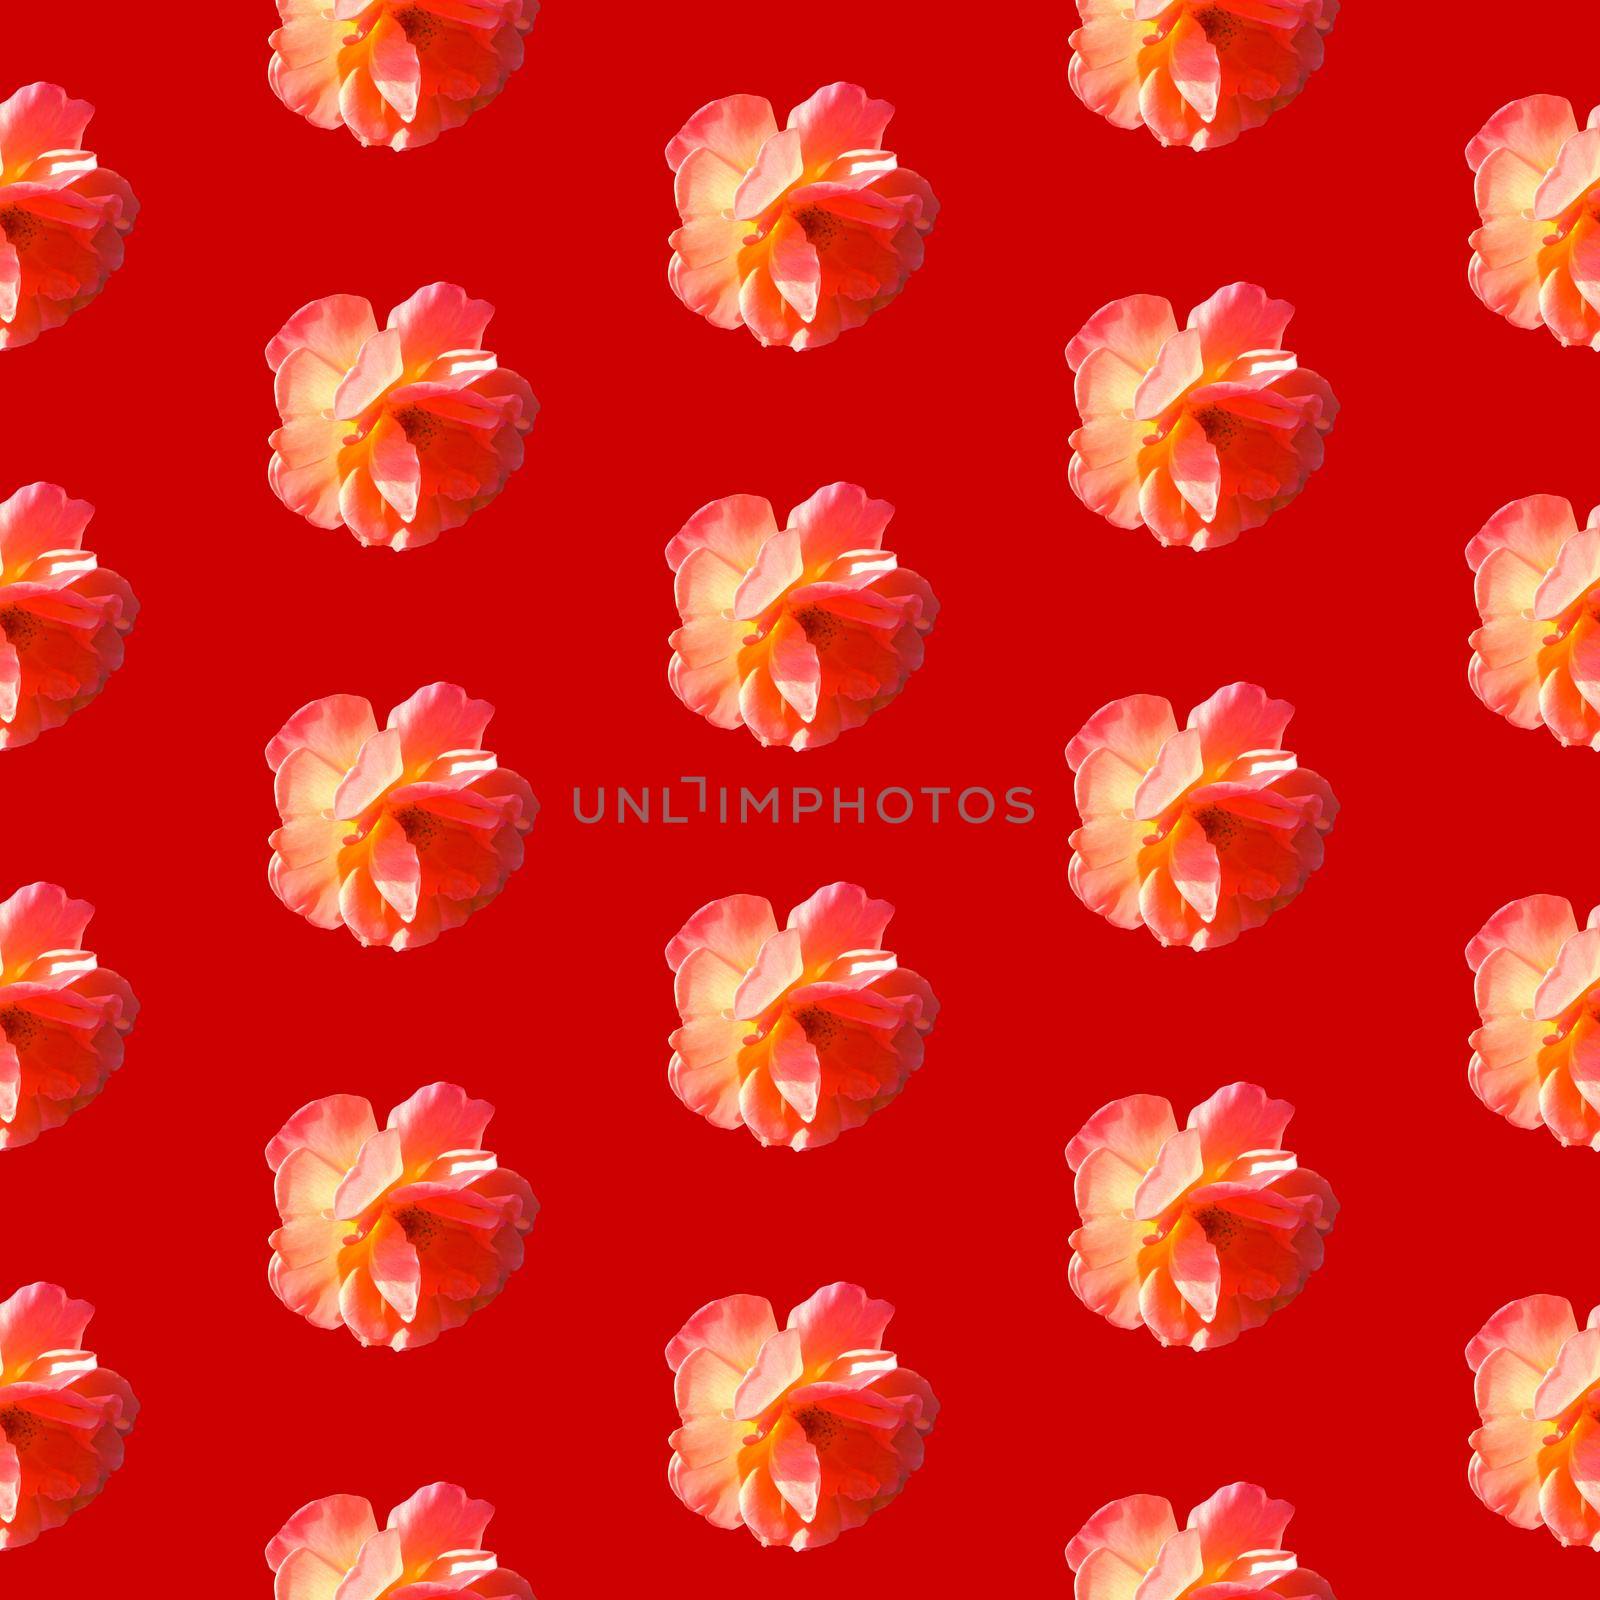 Seamless pattern with roses on a red background in hard light from behind from above. Pop art creative design for textile, fashion, fabric, wrapping paper.